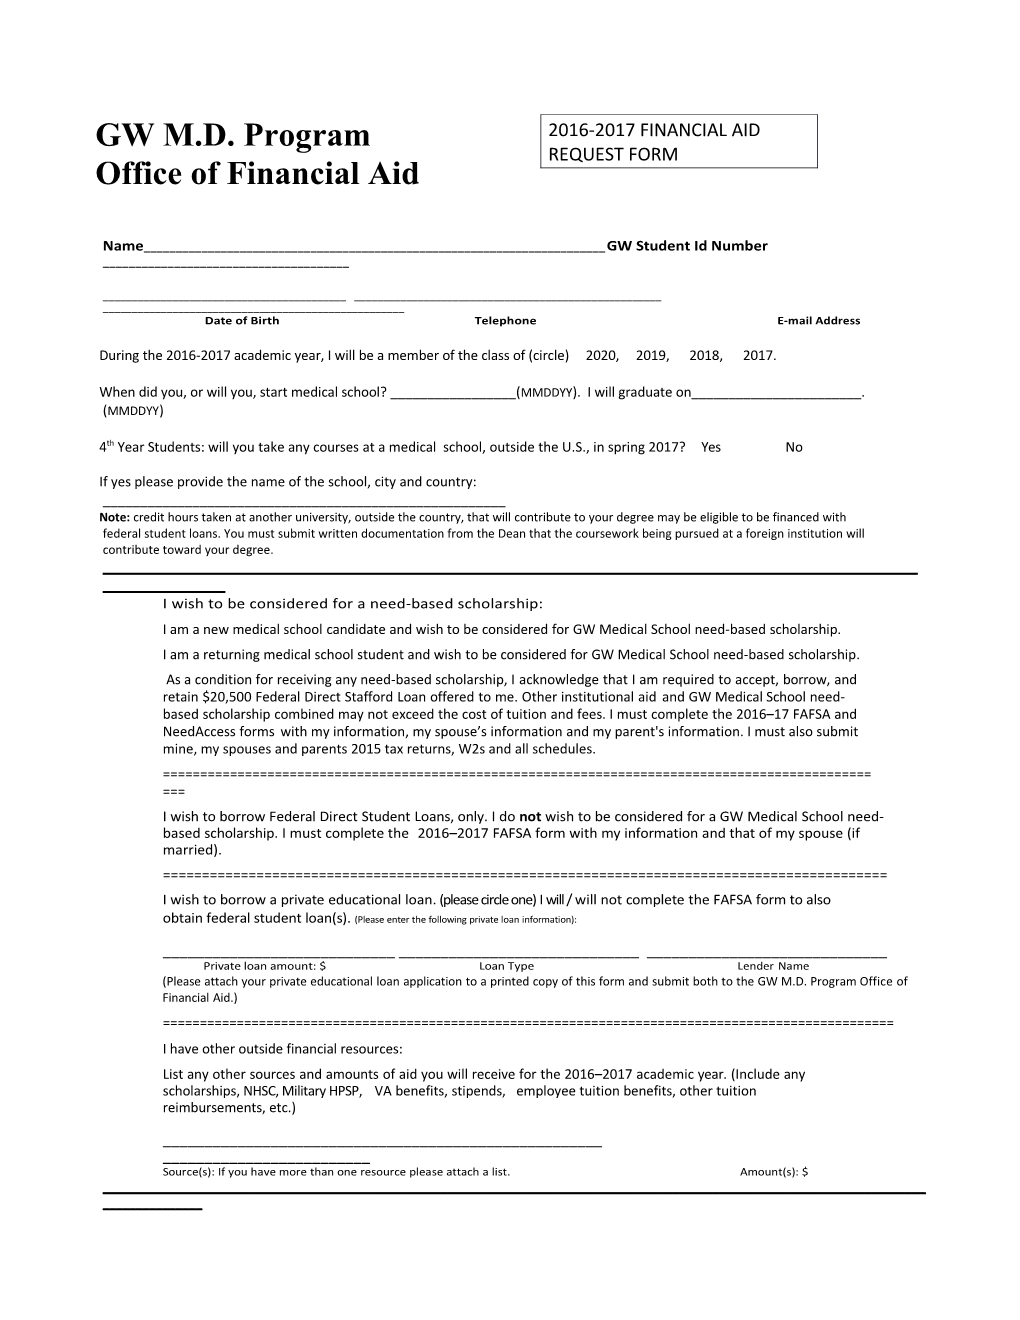 Office Offinancial Aid